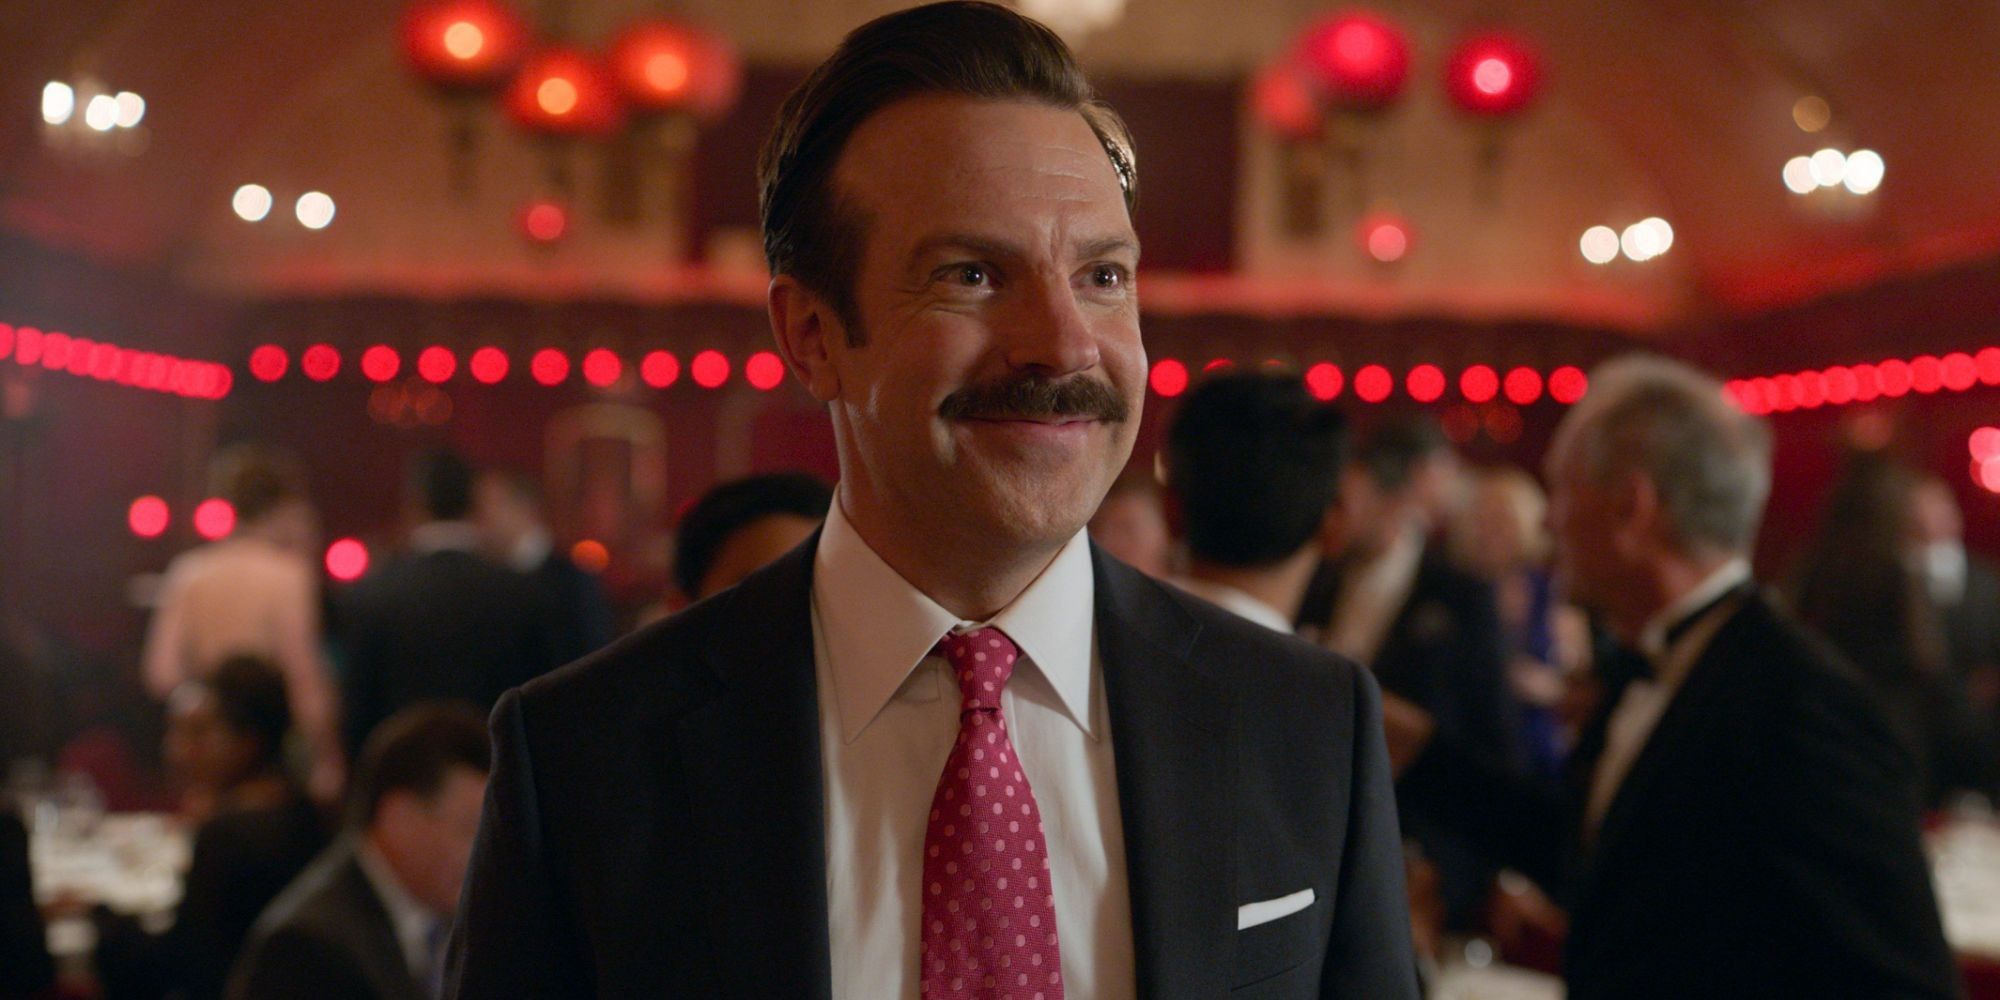 Ted Lasso in a suit charity event